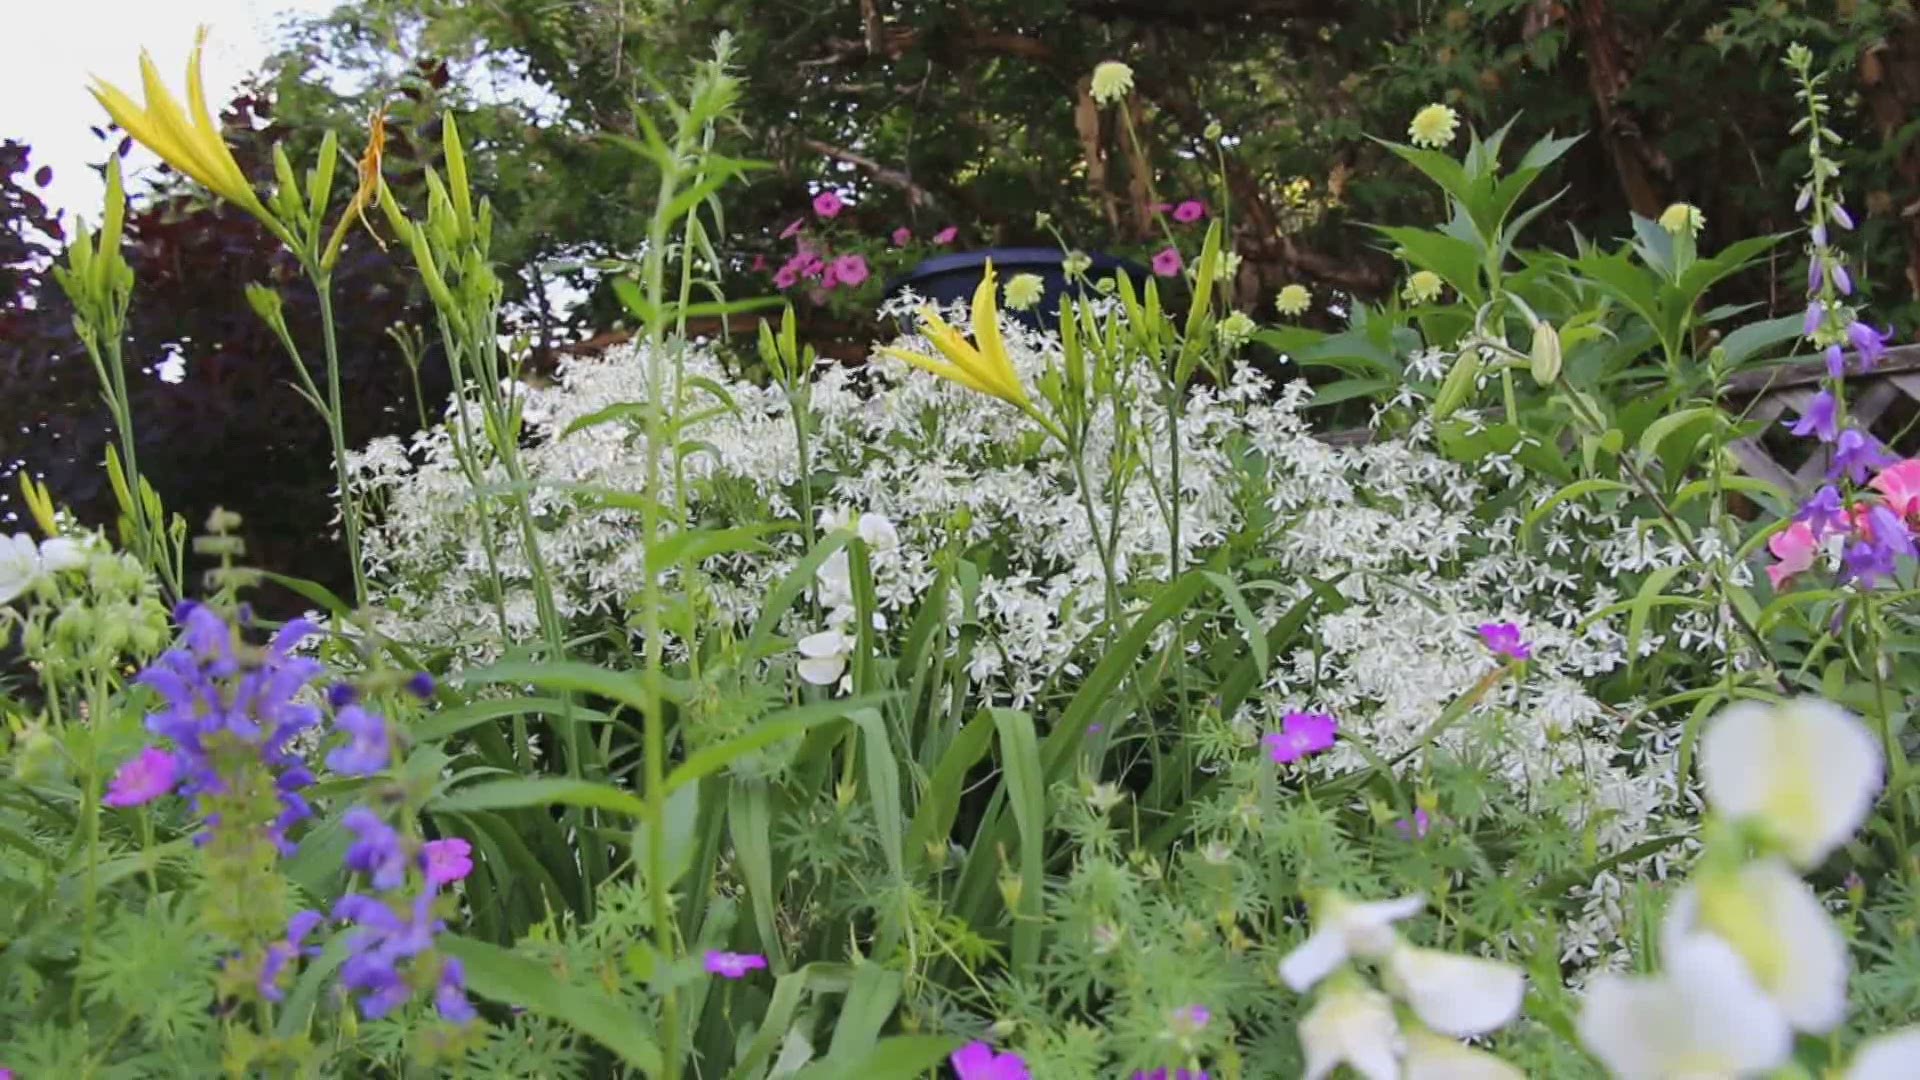 Garden expert Rob Proctor shares eight steps to take for a perfect perennial border.